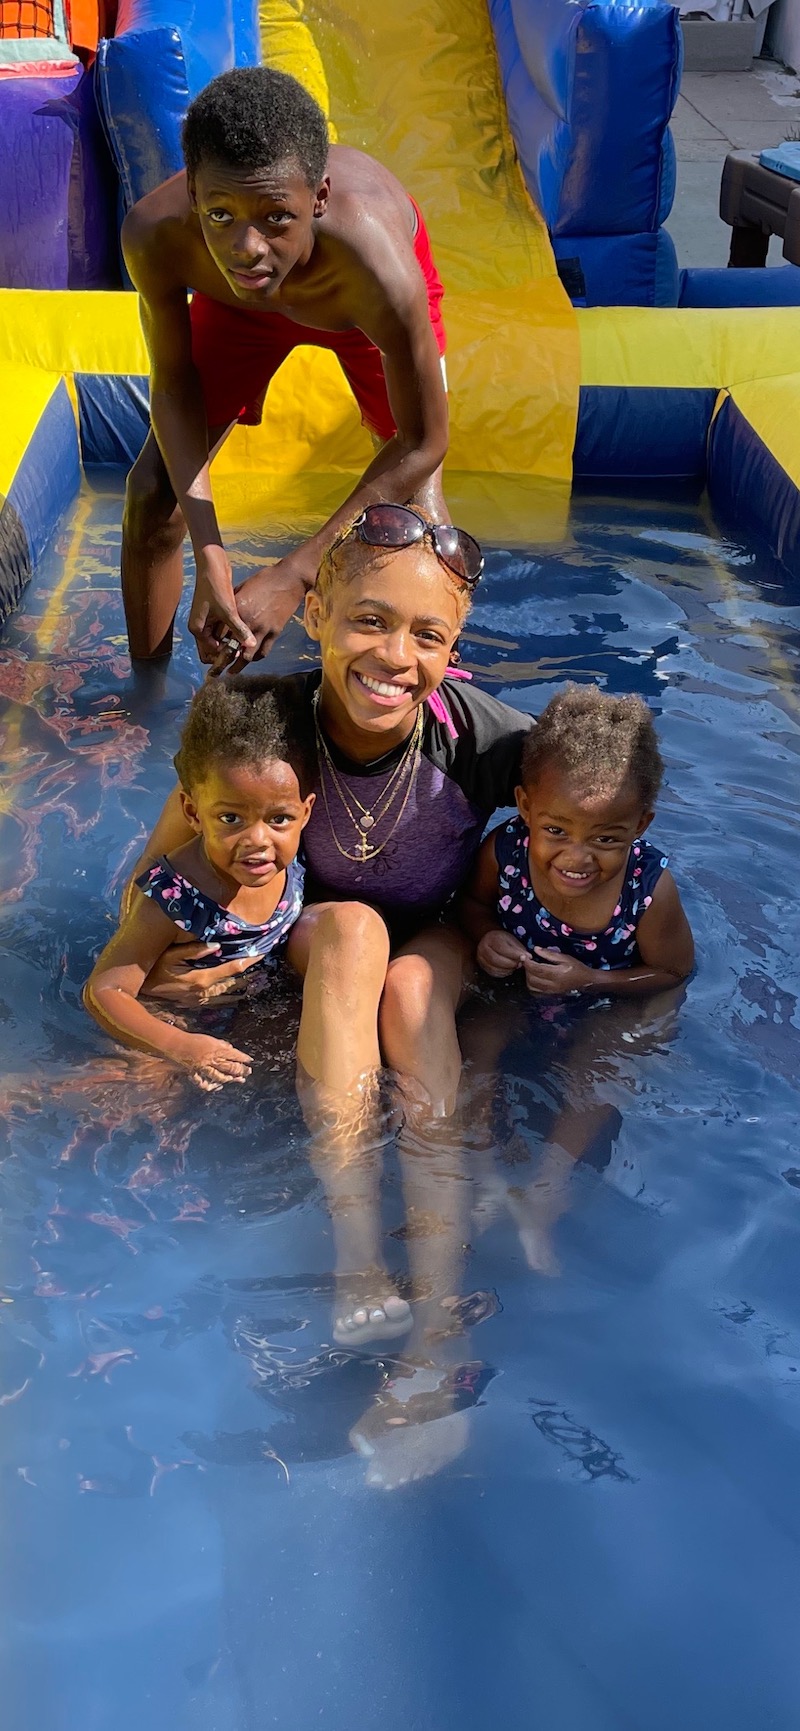 A teacher is with two little girls in the pool, and a boy in red shorts is smiling behind them after coming down the water slide.